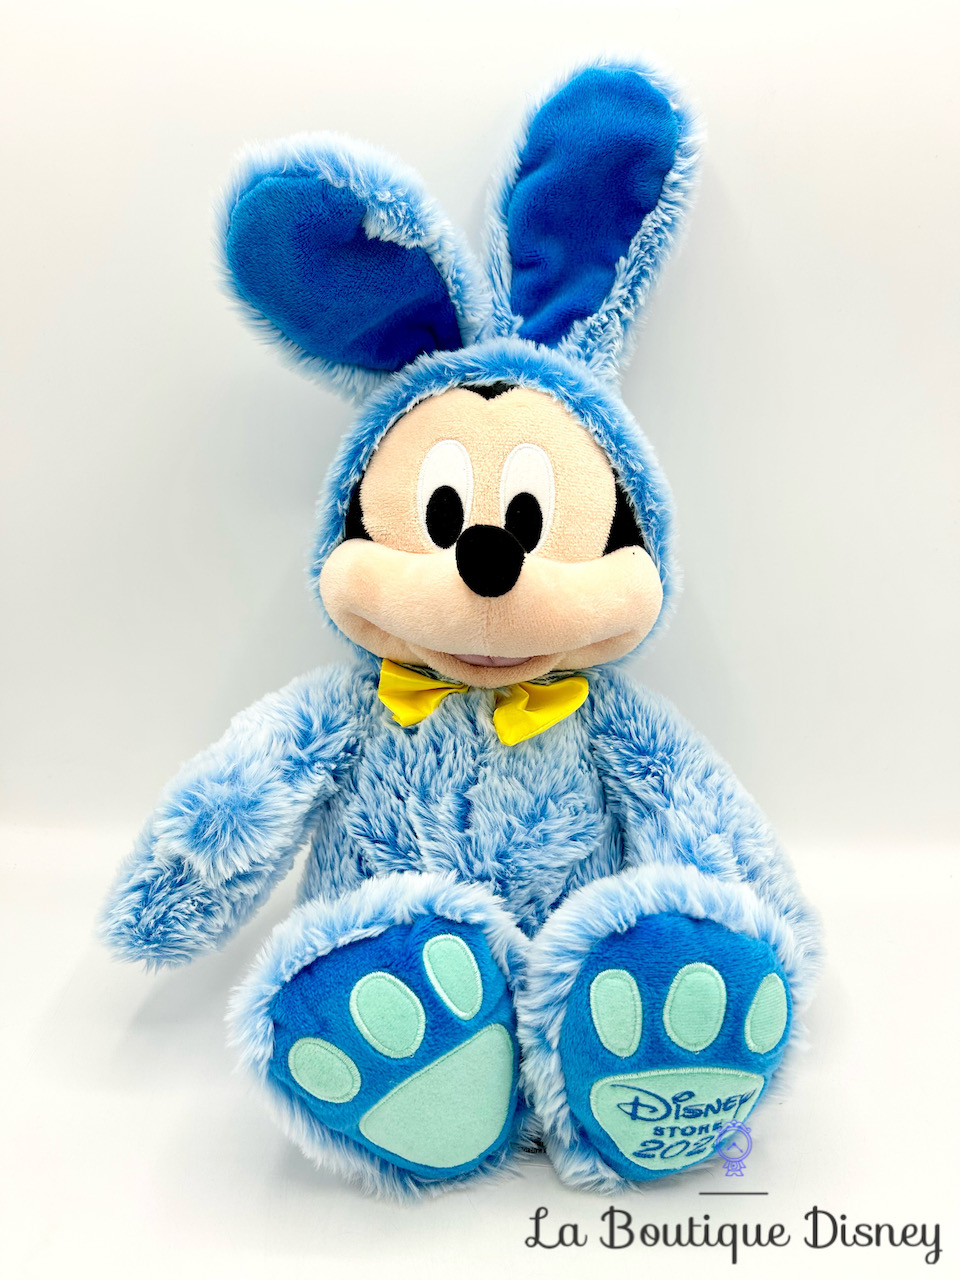 peluche-mickey-mouse-paques-disney-store-2021-lapin-bleu-0